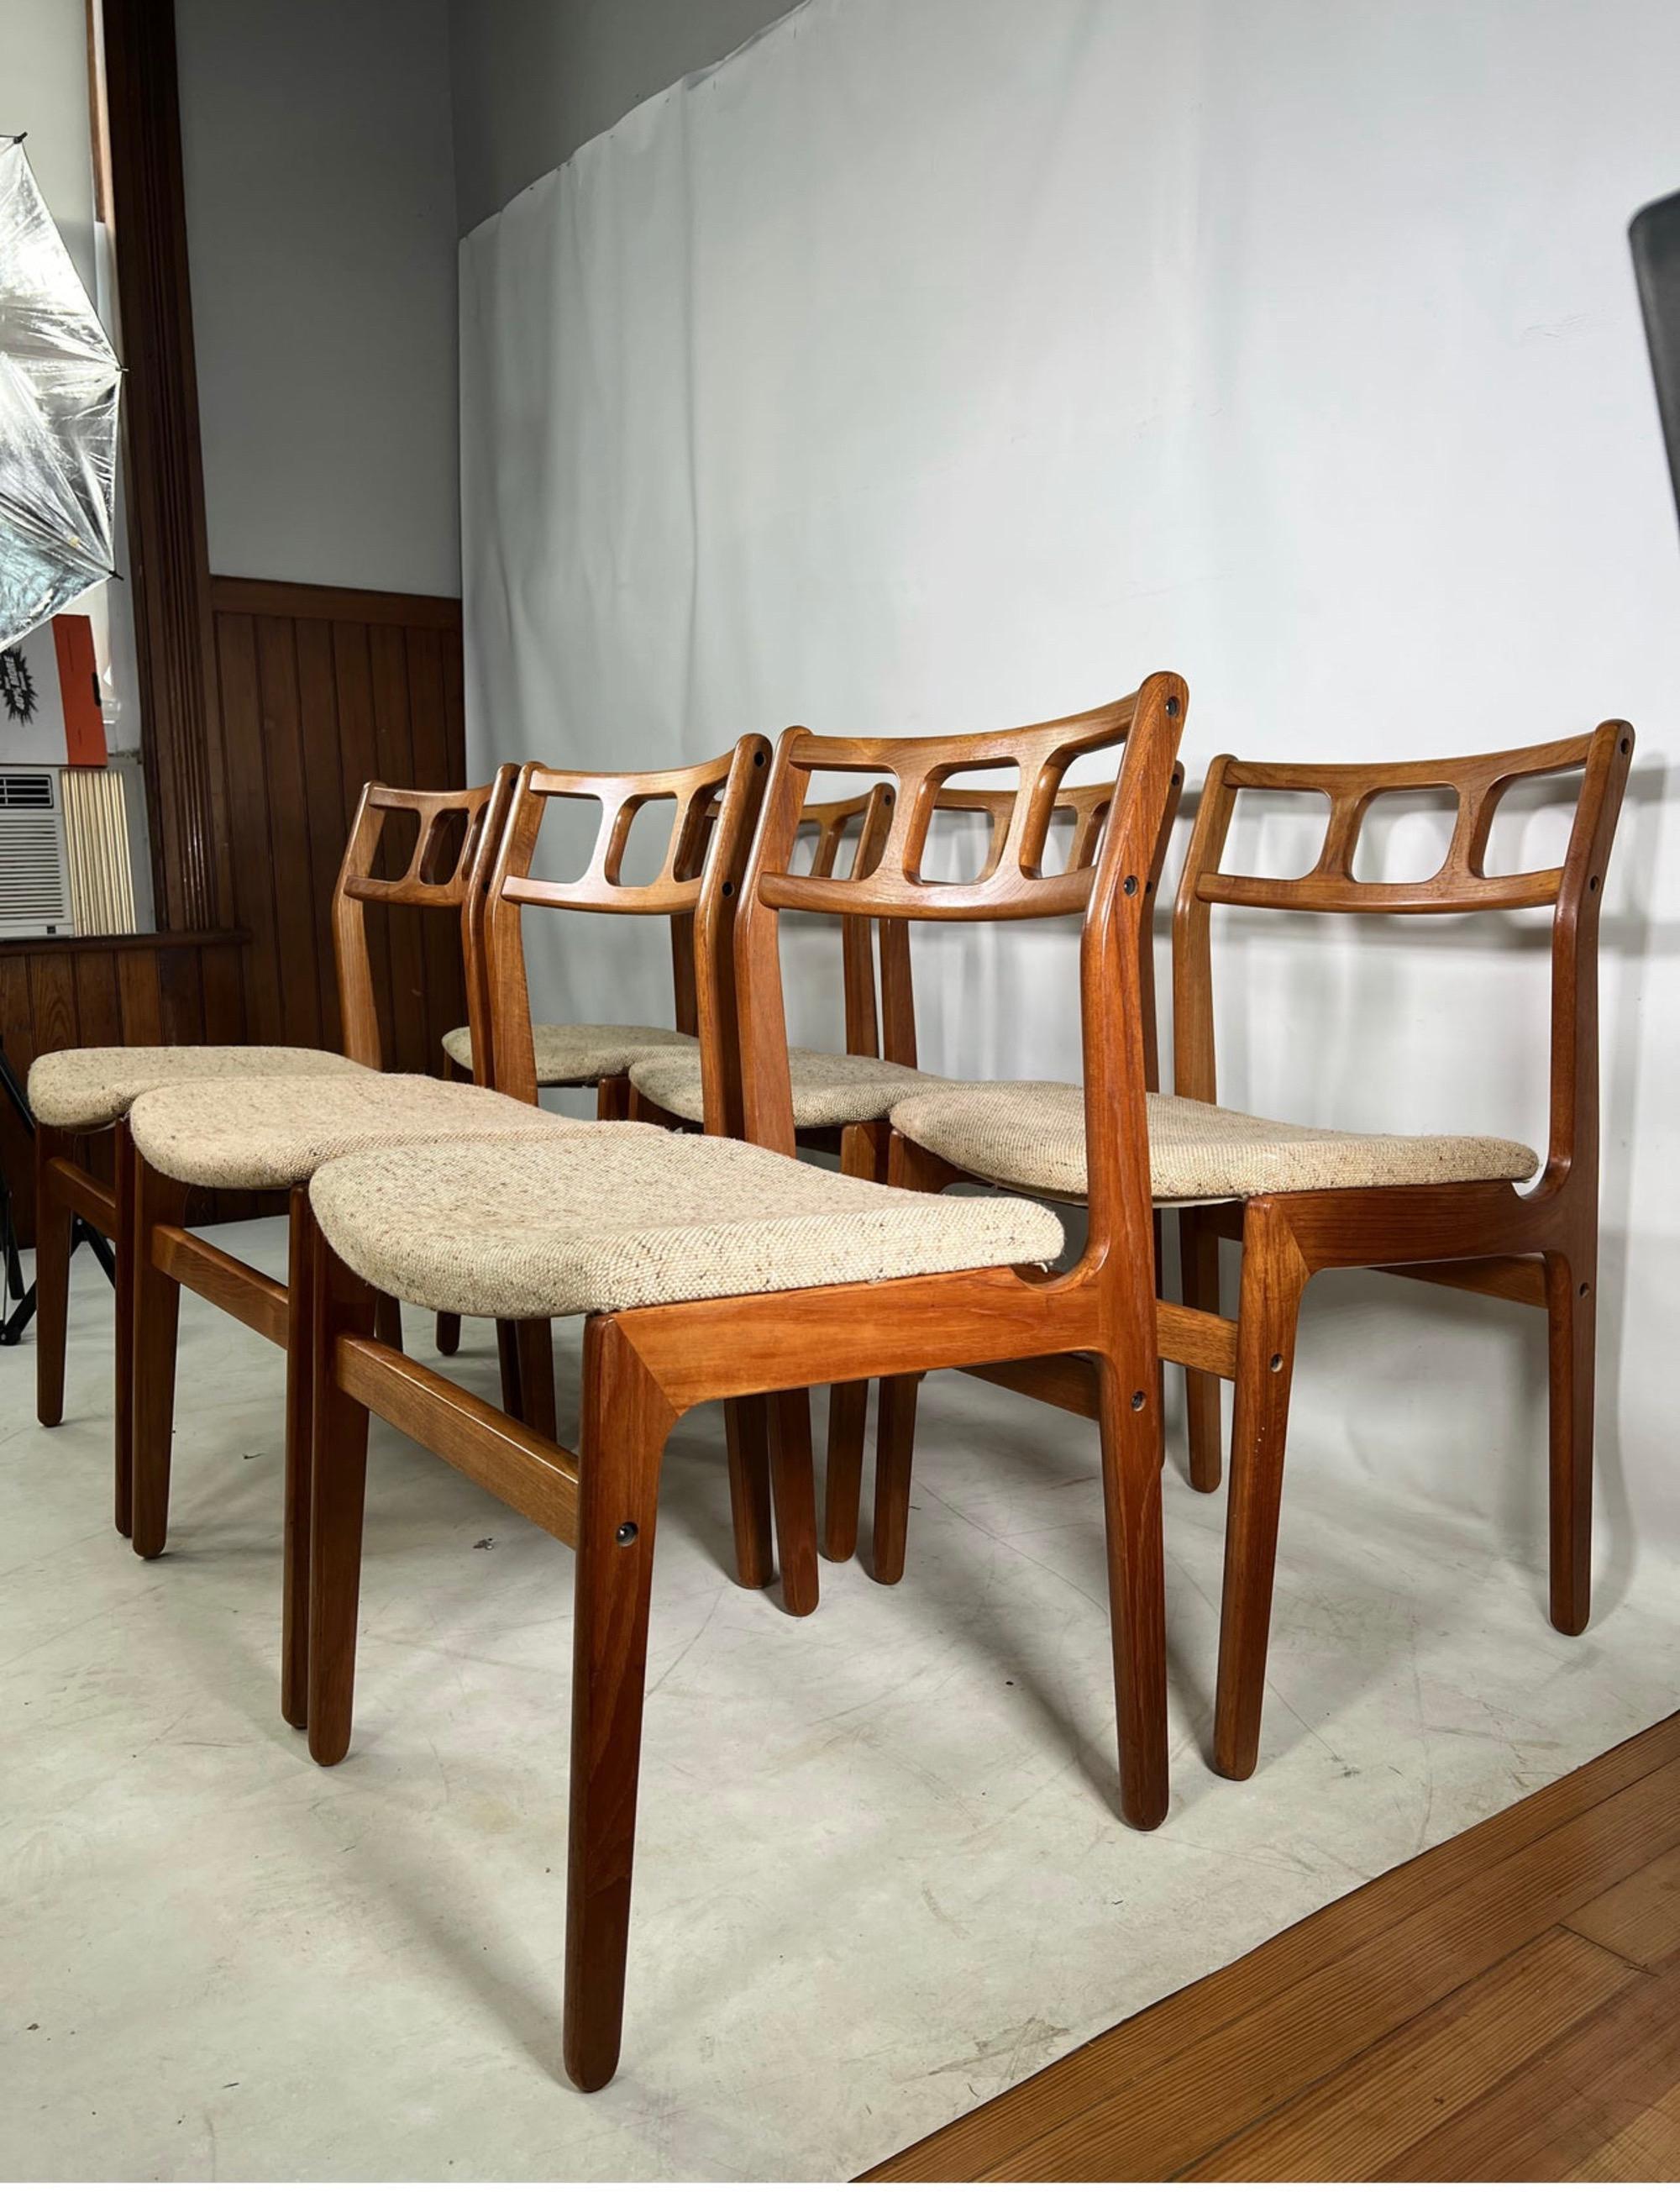 Great set of 6 vintage d scan Danish style chairs. The chairs have a great sculptural design and are solid teak.